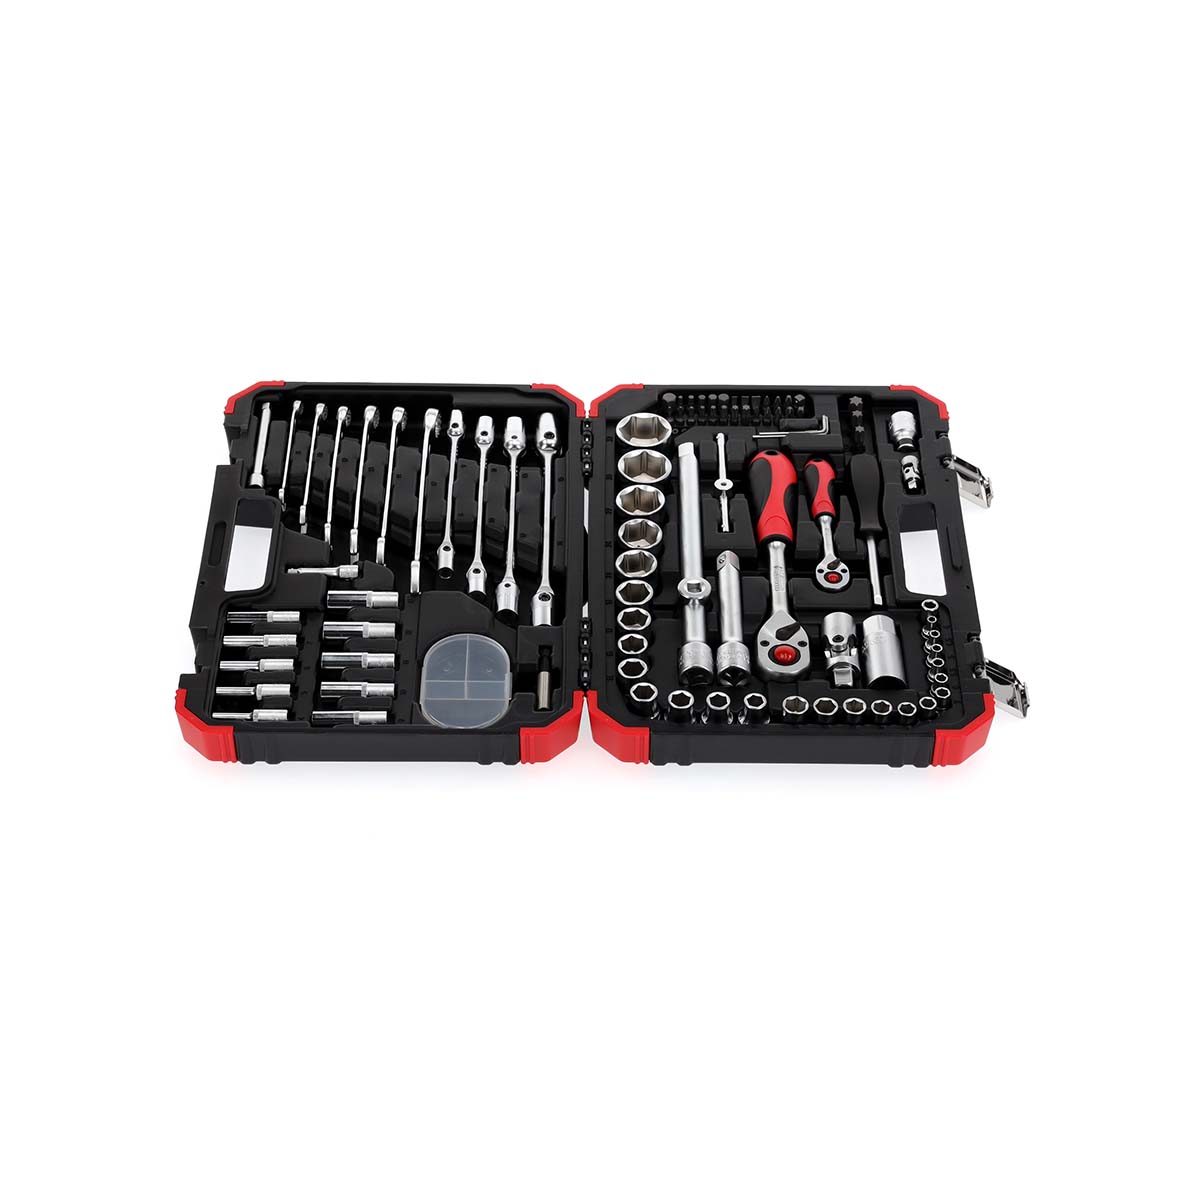 GEDORE red R46003092 - 1/4"+1/2" socket set, 92 pieces (3300062)